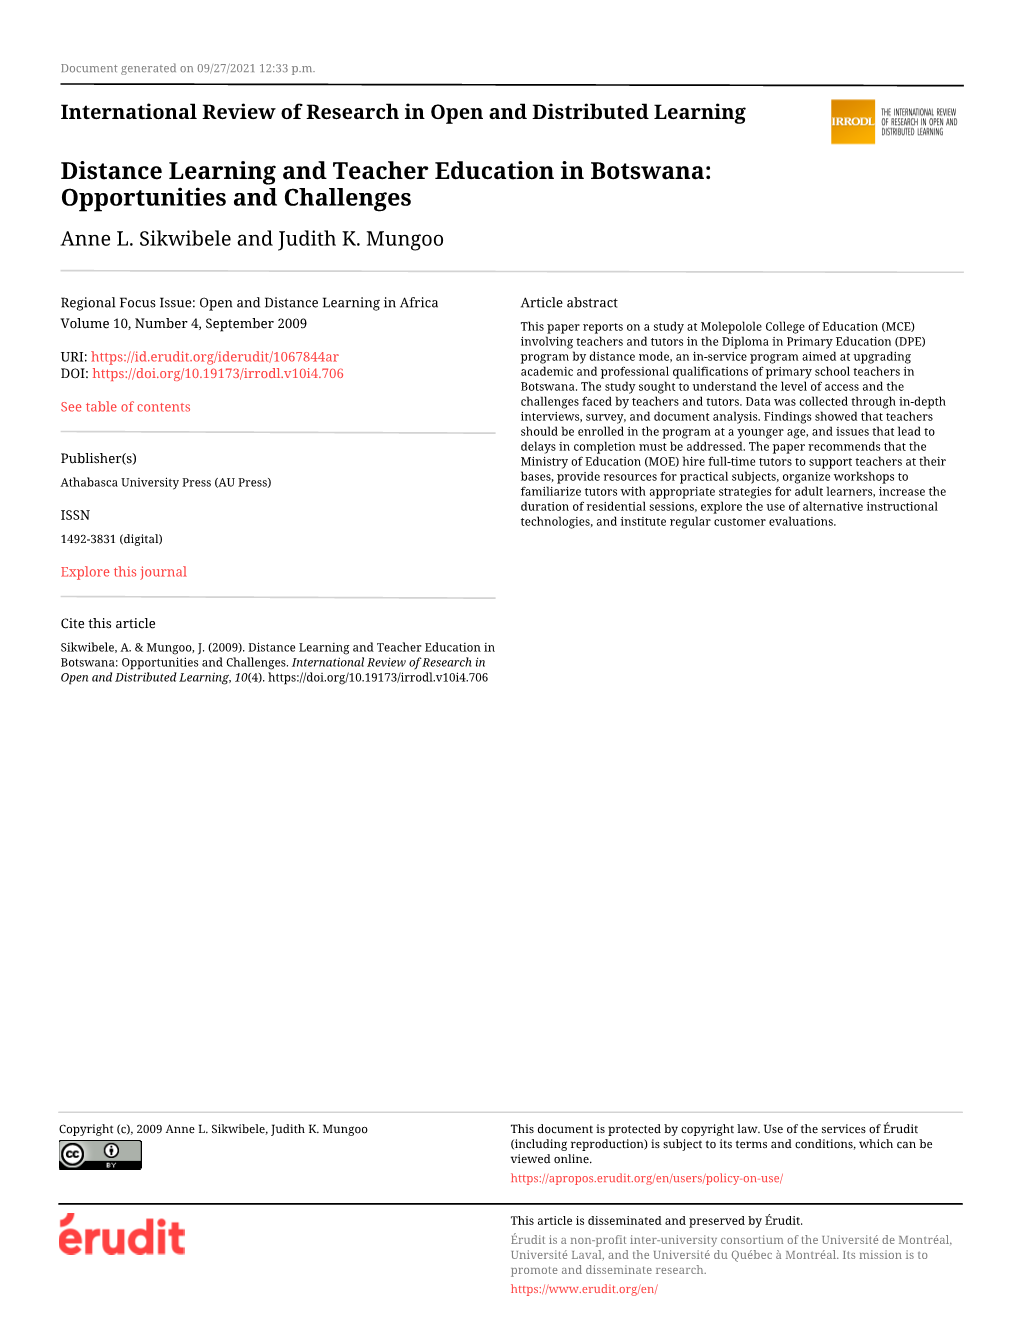 Distance Learning and Teacher Education in Botswana: Opportunities and Challenges Anne L